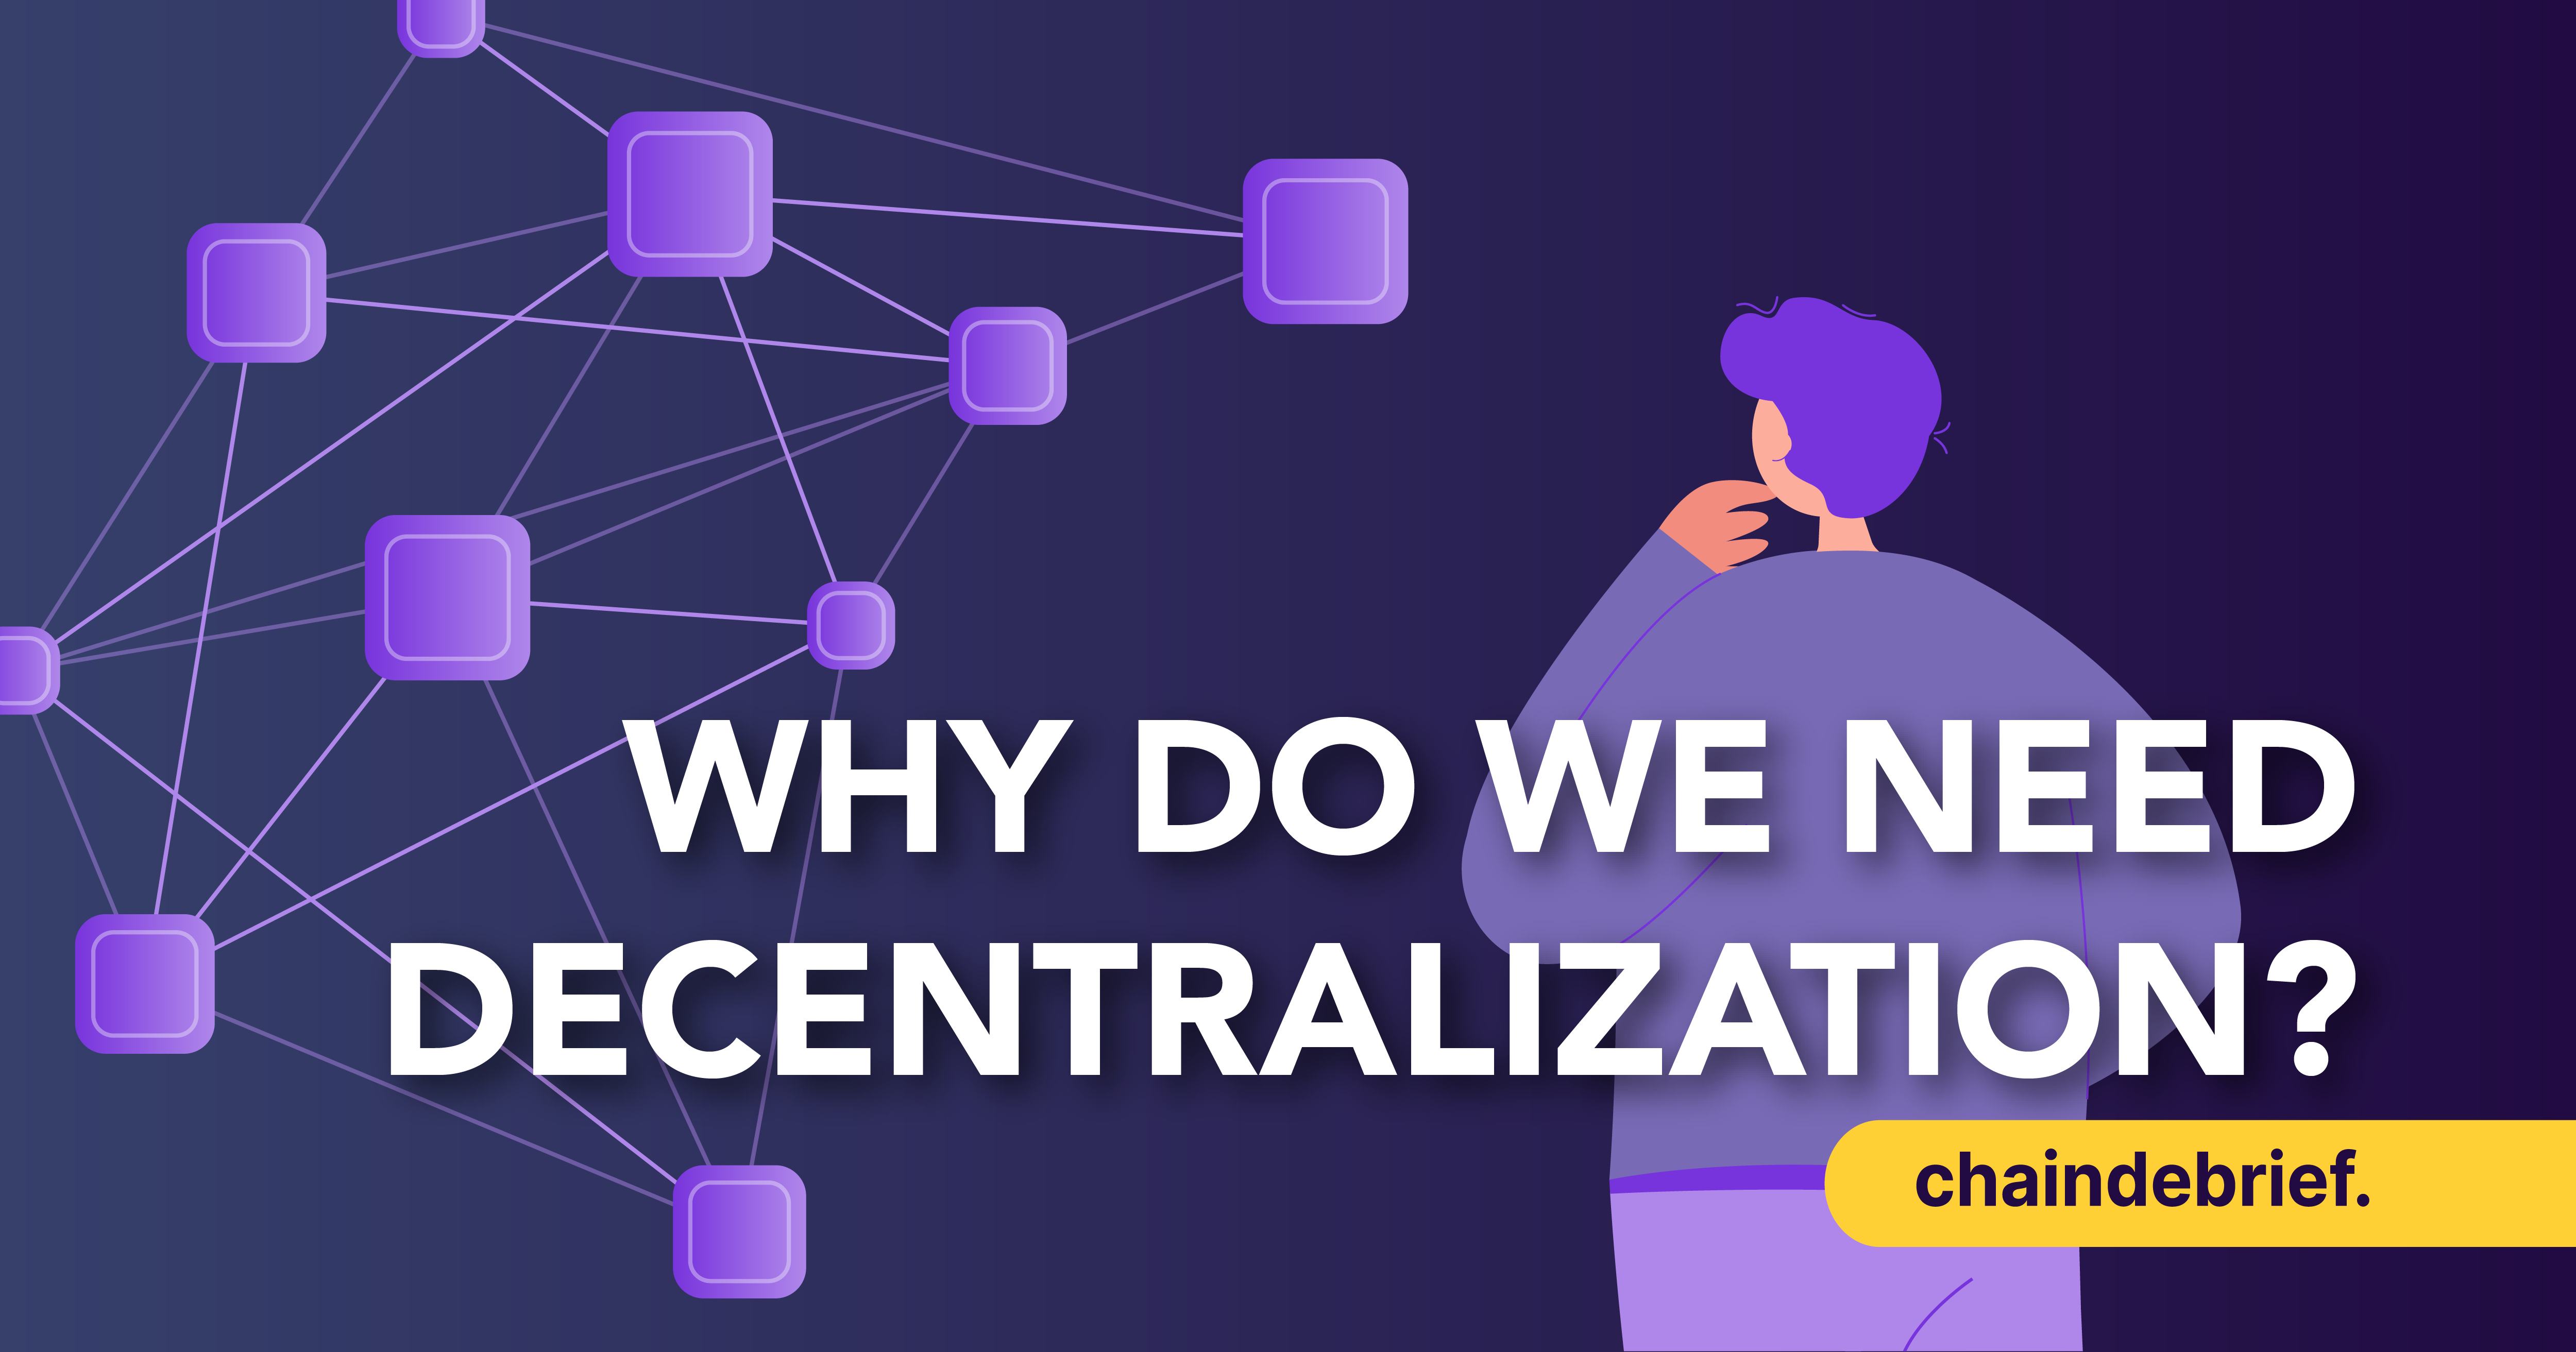 Centralization Sucks, But Is Decentralization Really The Answer?